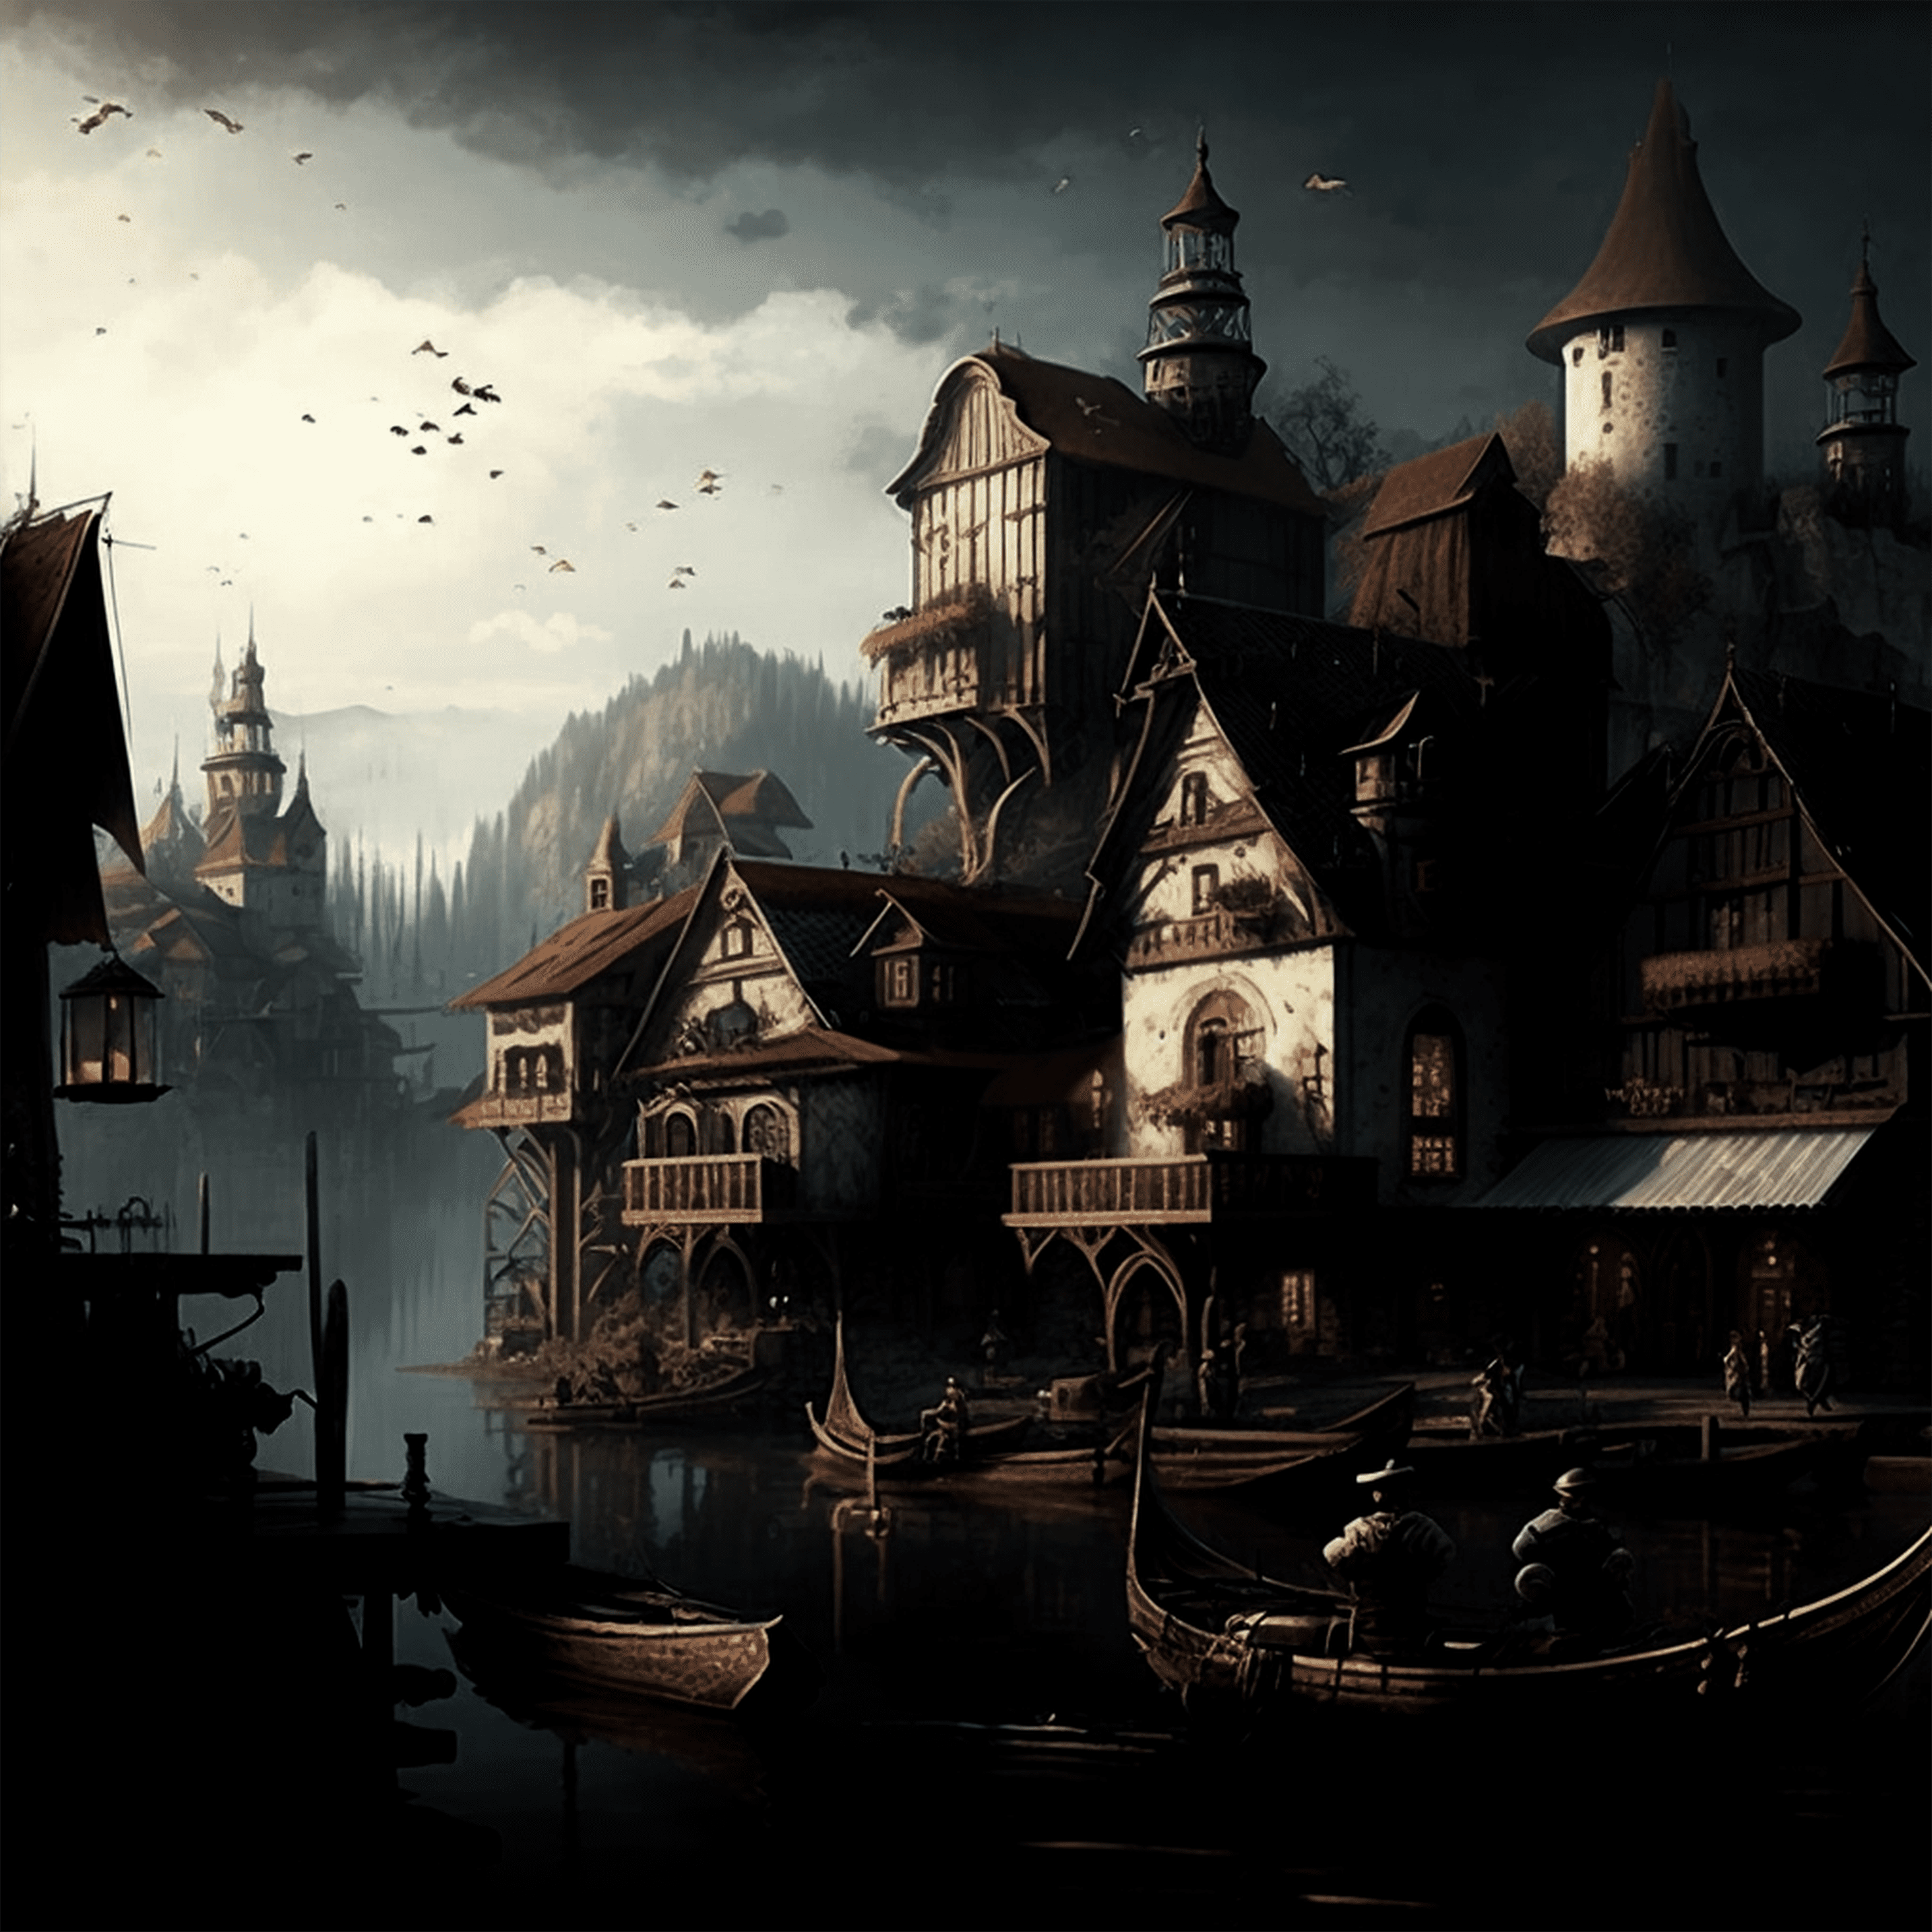 images/overcast_smmk_busy_fantasy_town_with_river_harbor_in_the_middle-0000.png